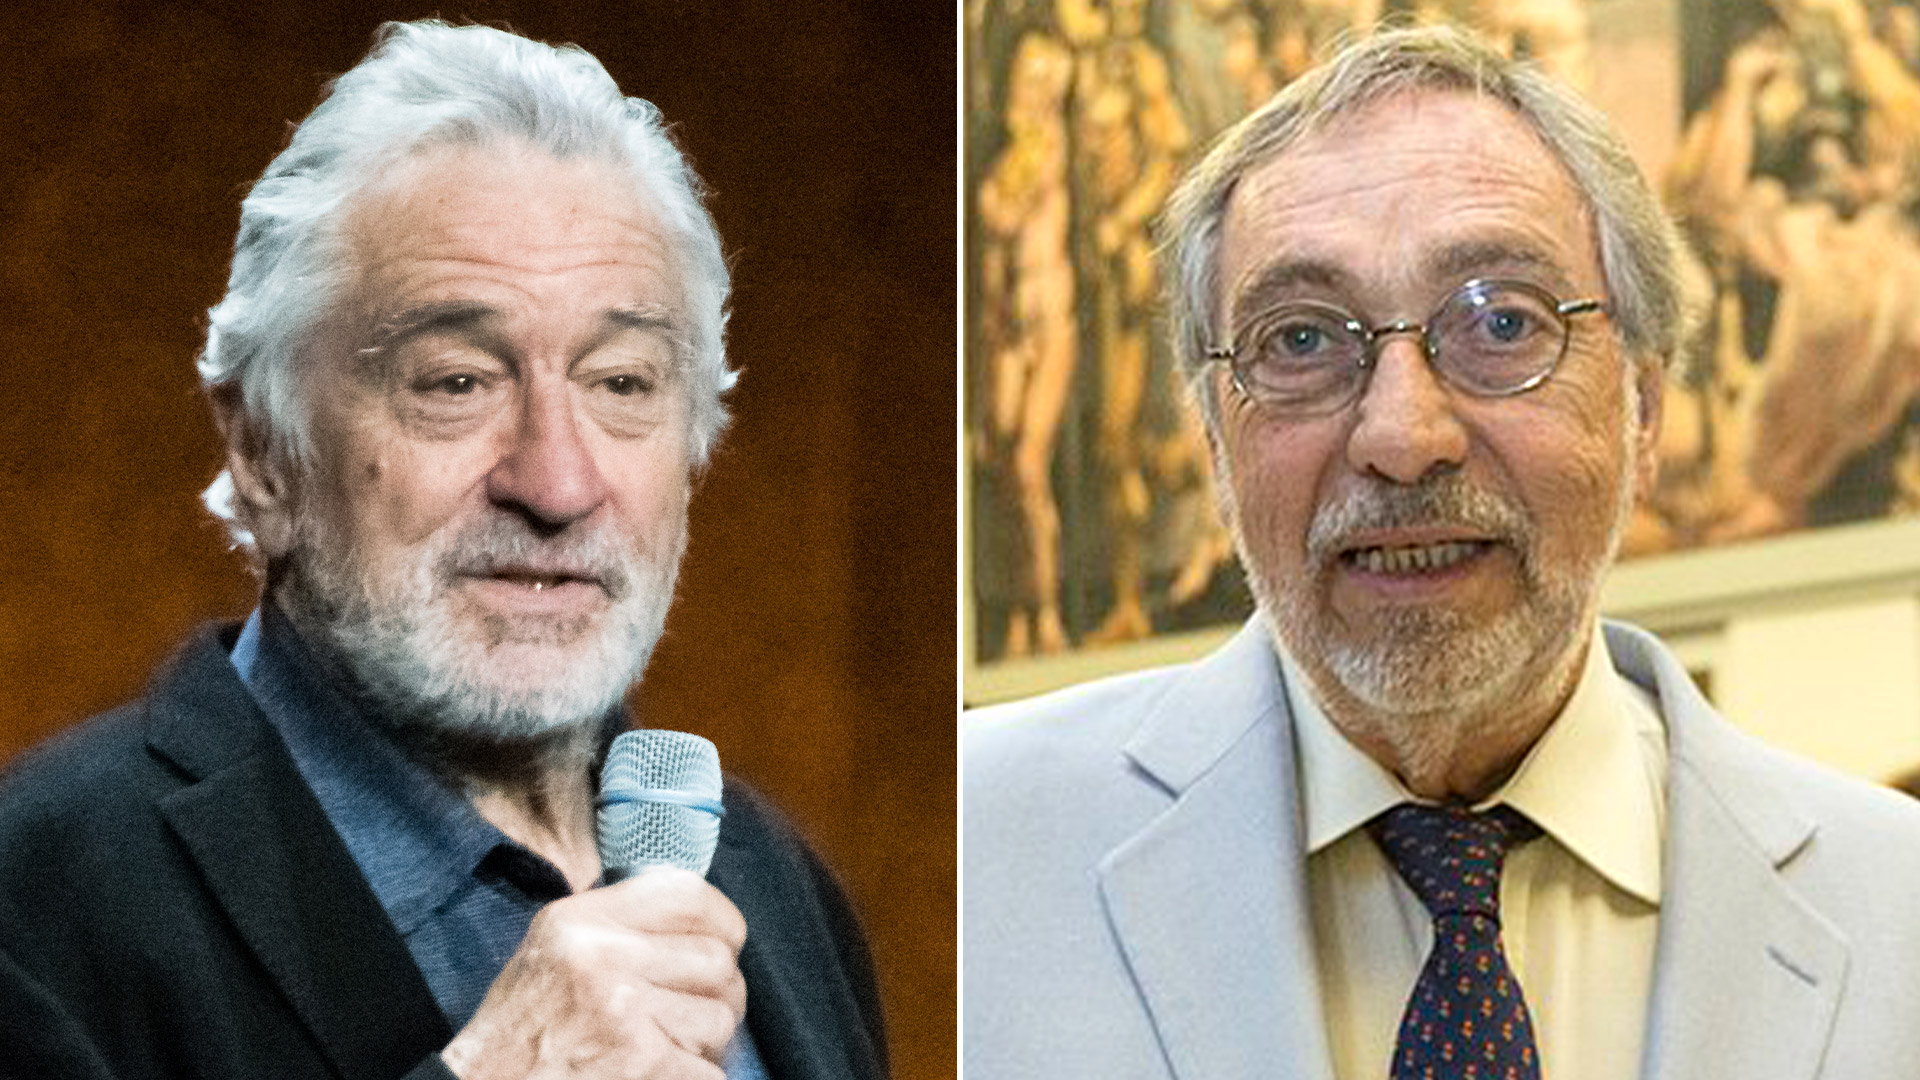 The famous Argentine actor Luis Brandoni will star in the series in which Robert De Niro will have a special participation.